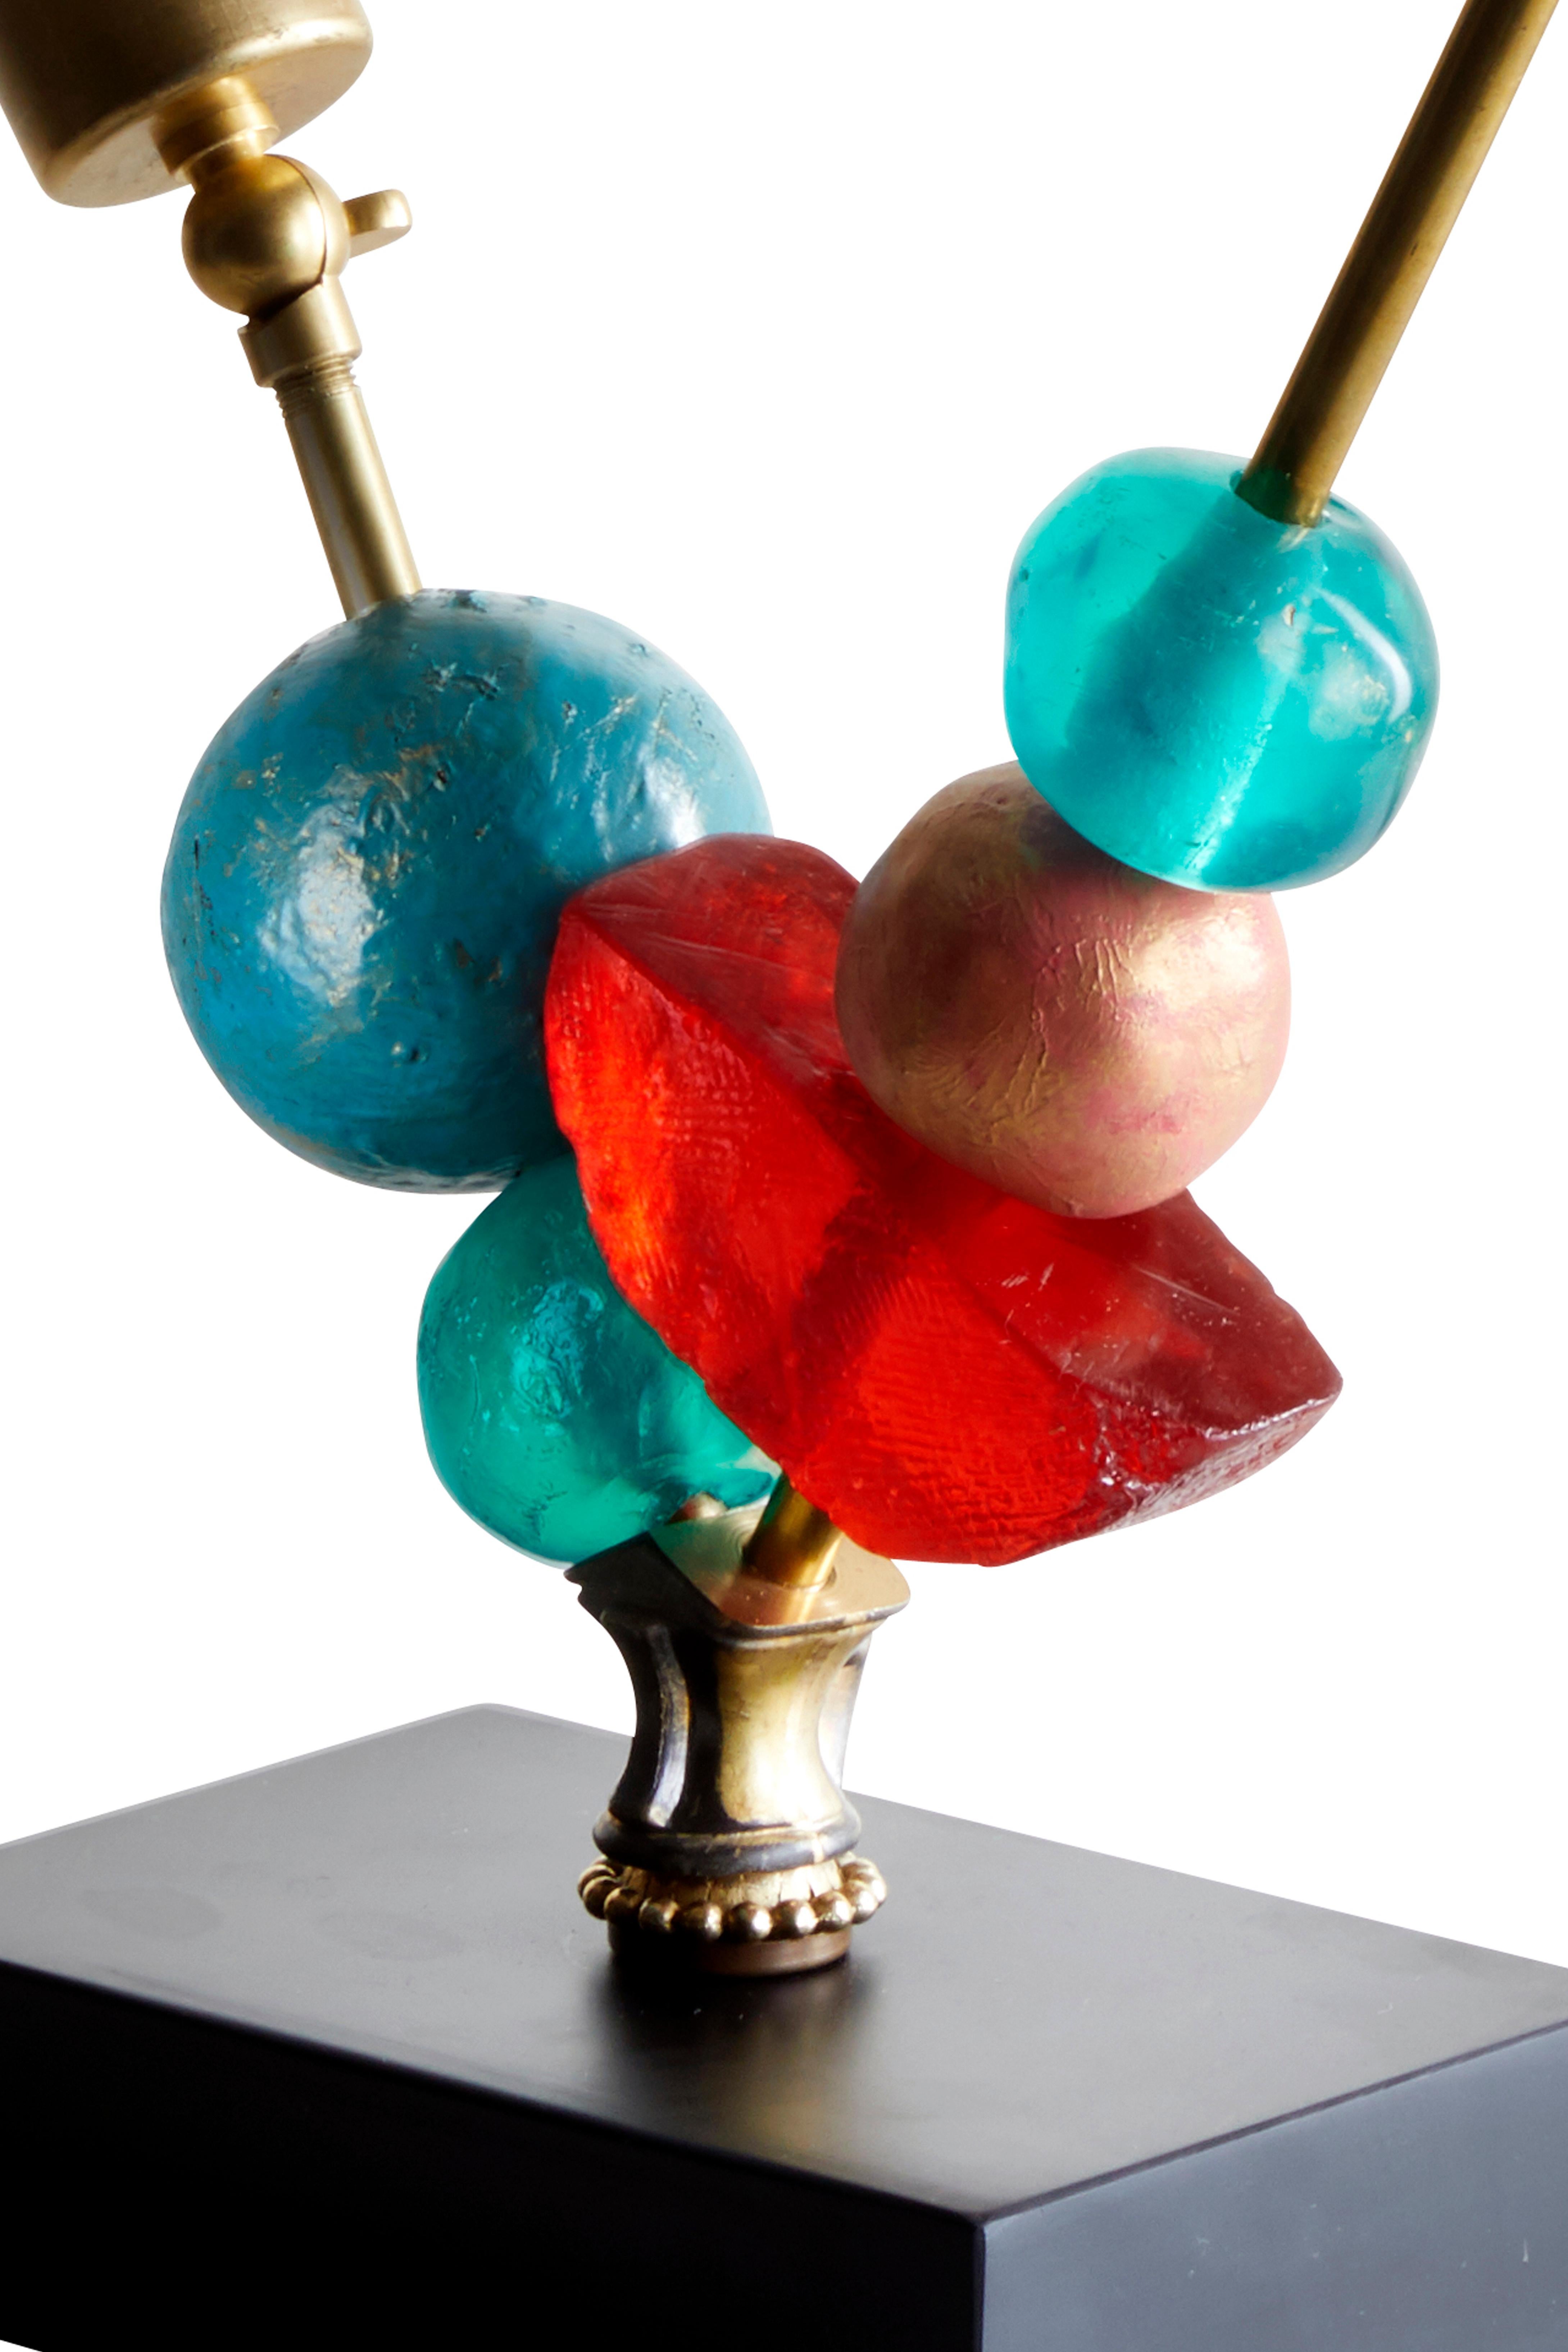 This Margit Wittig lamp can serve as a table lamp or as a desk and art light. With translucent epoxy resin emerald and fire red elements this piece is made in Wittig's London studio.

Margit Wittig is inspired by modern artists and sculptors such as